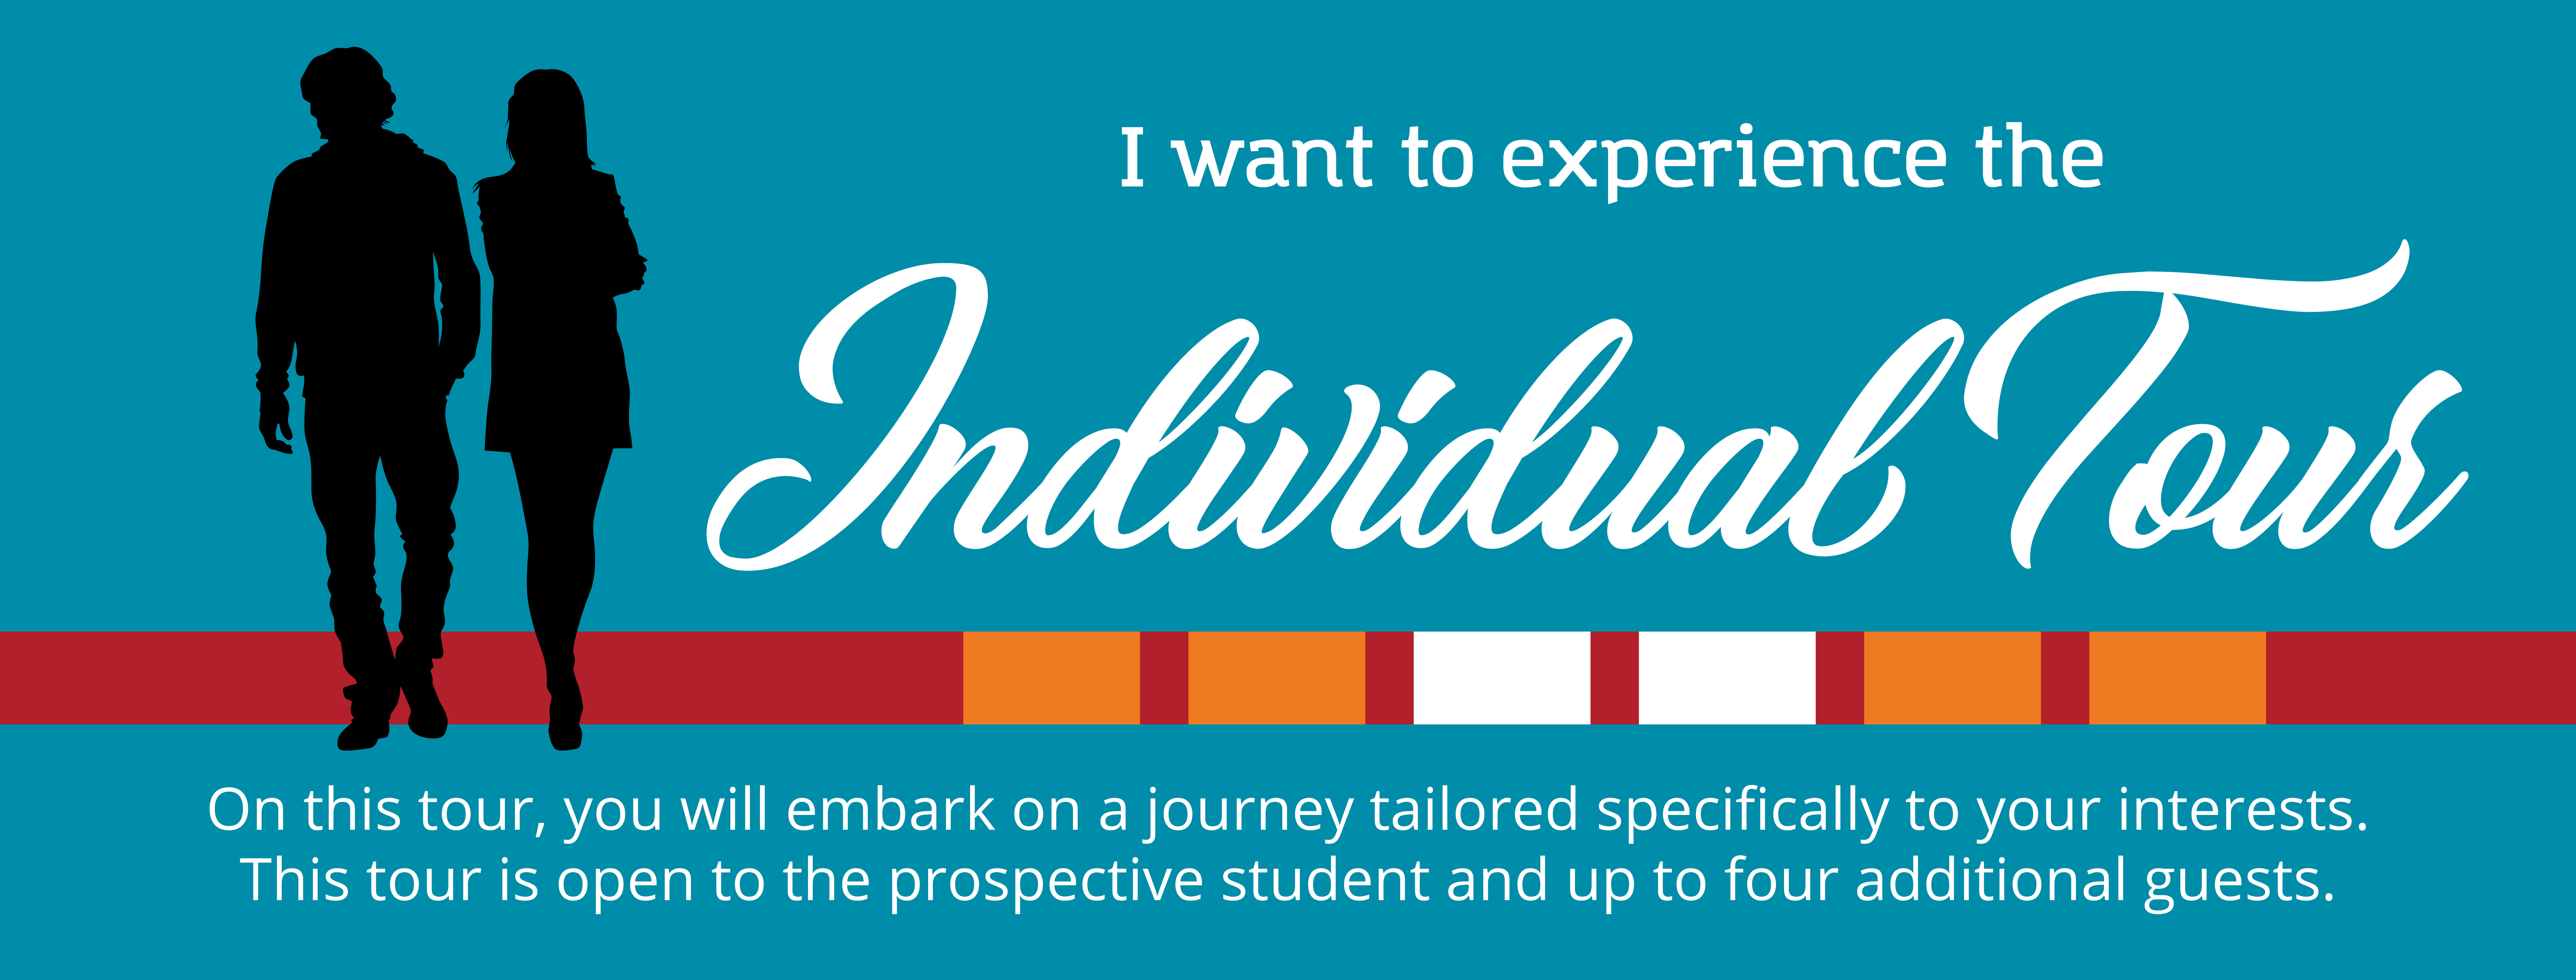 Individual Tour button. Click here to experience the individual tour. On this tour you will embark on a journey tailored specifically to your interests. This tour is open to the prospective student and up to four additional guests.